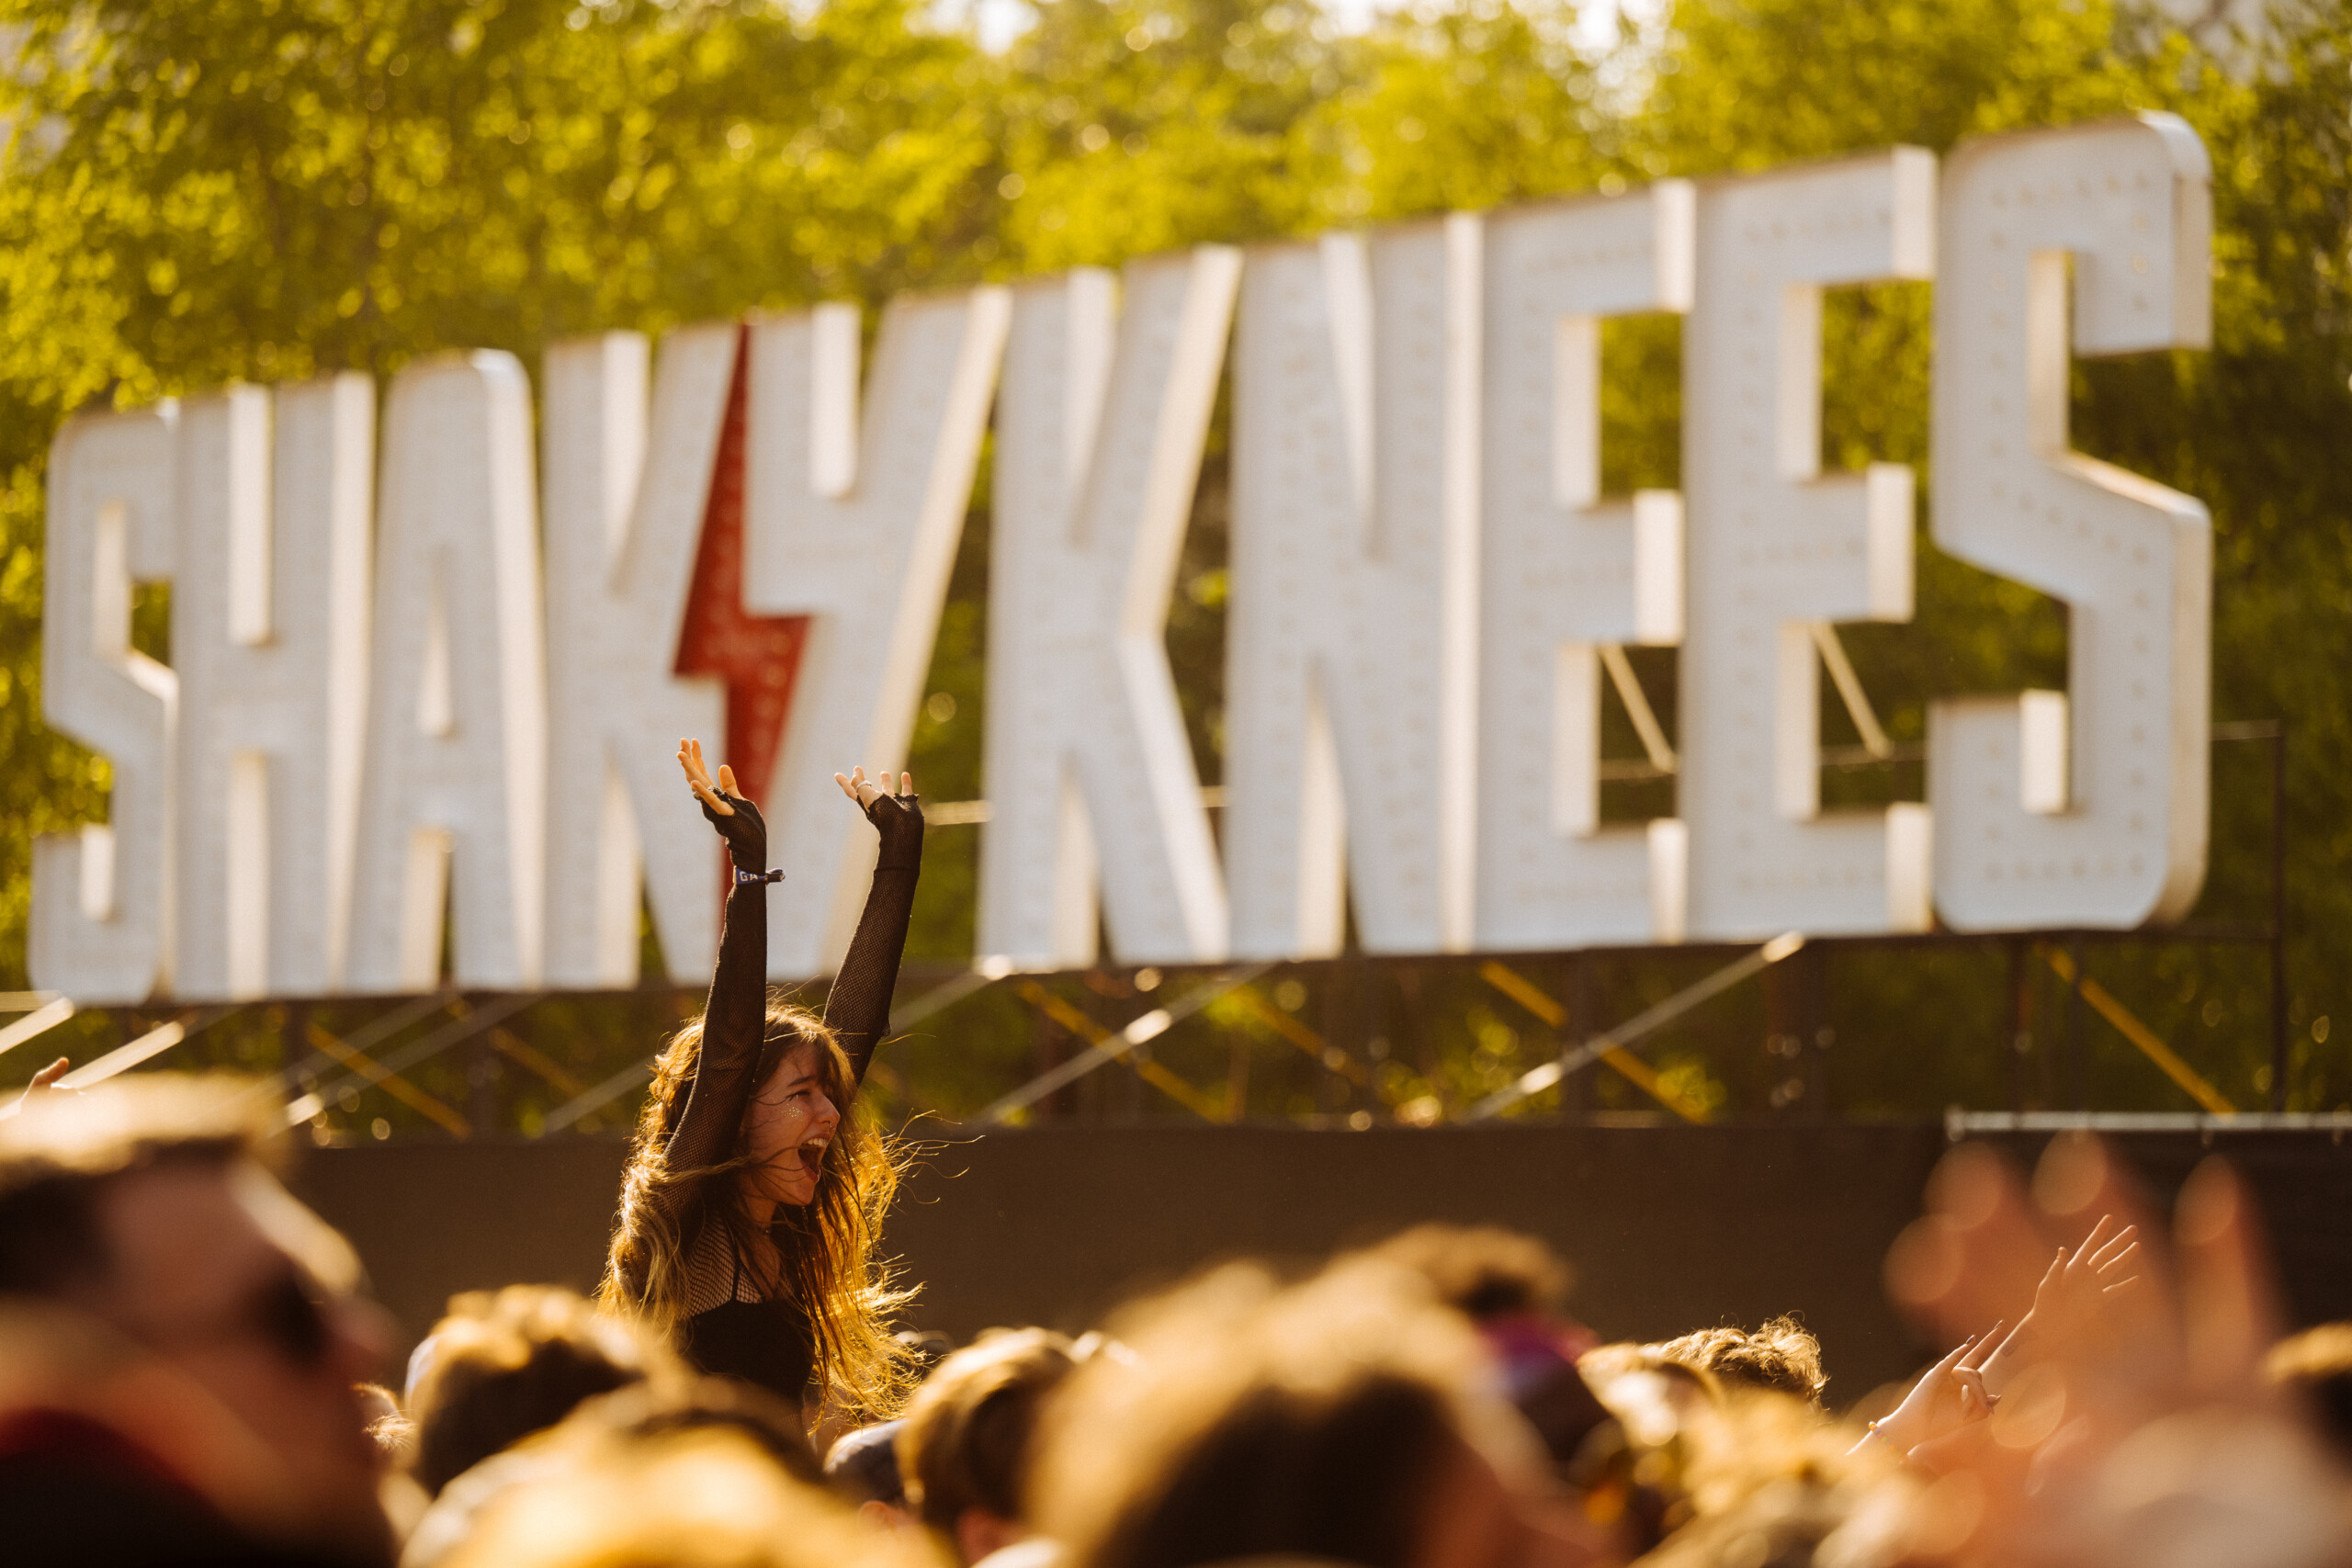 Featured image for “The Killers, Yeah Yeah Yeahs, Muse, The Flaming Lips to Play This Year’s Shaky Knees Festival”